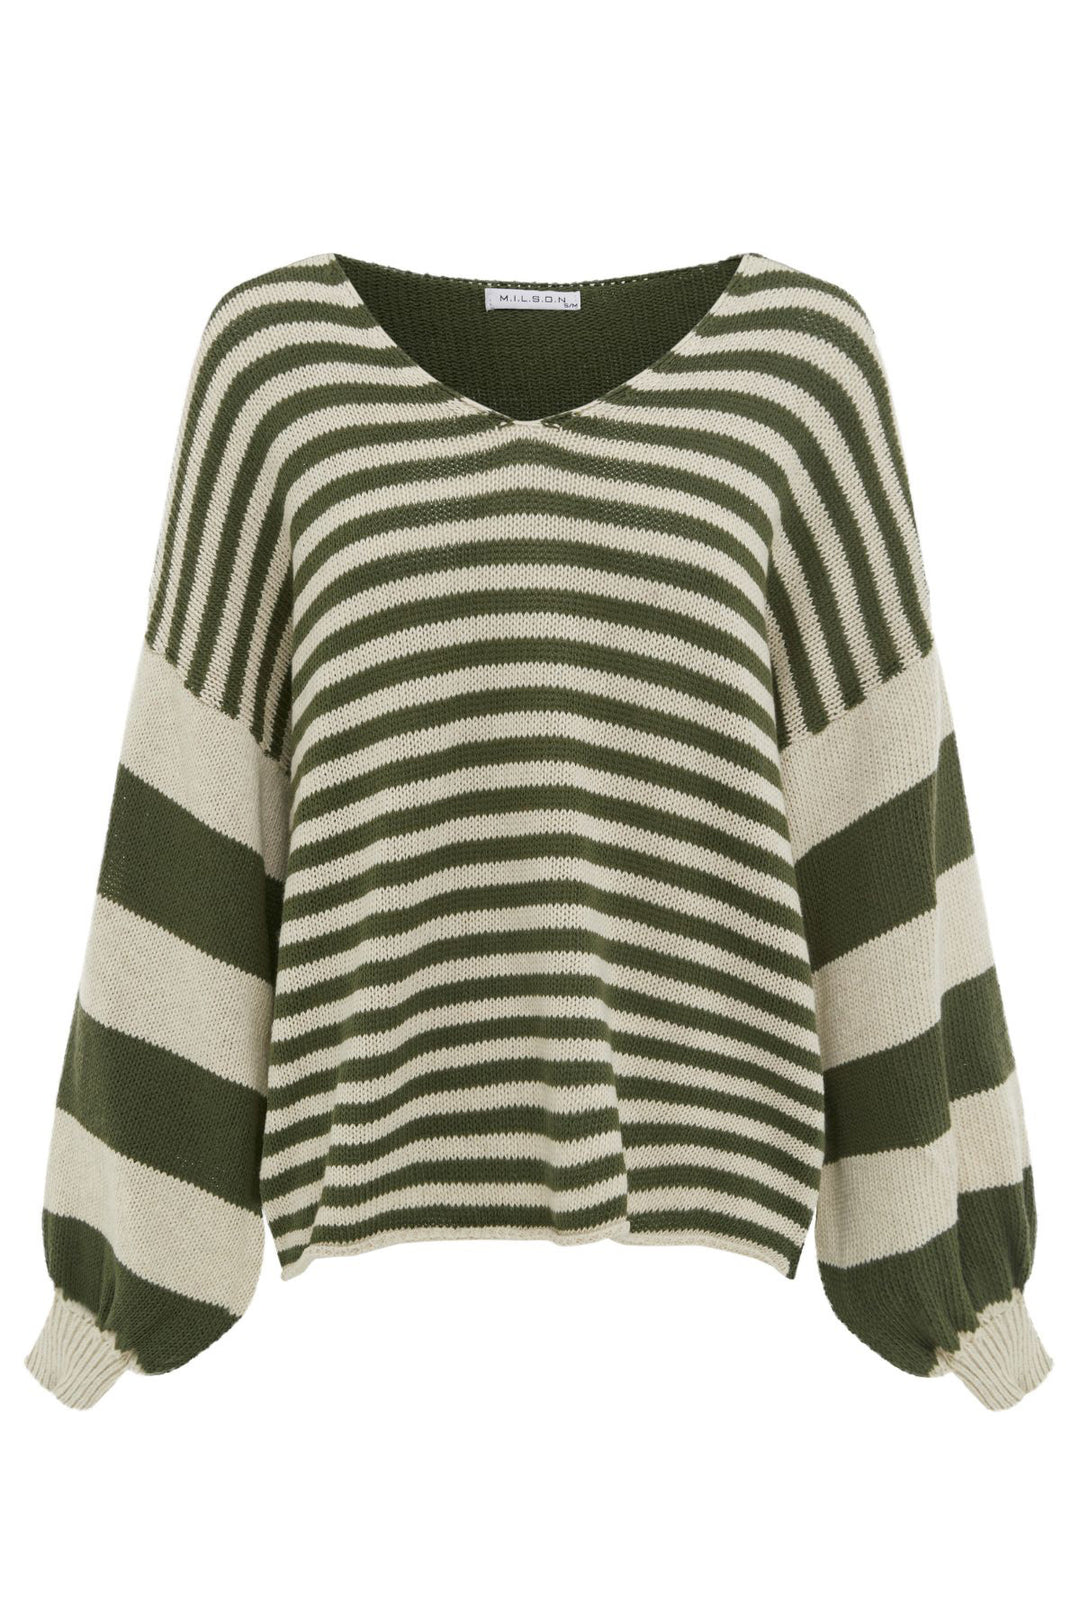 The Ottavia Sweater By MILSON is a gorgeous v-neck knit. Featuring chunky bell sleeves and a contrasting stripe pattern. Perfect for layering, pair this beauty with your favourite jeans or pants.  Brand : MILSON Style Code : ML4153 Ottavia V-Neck Colour : Khaki Fabric : 50% Cotton 50% Acrylic Cold hand wash Made in Italy